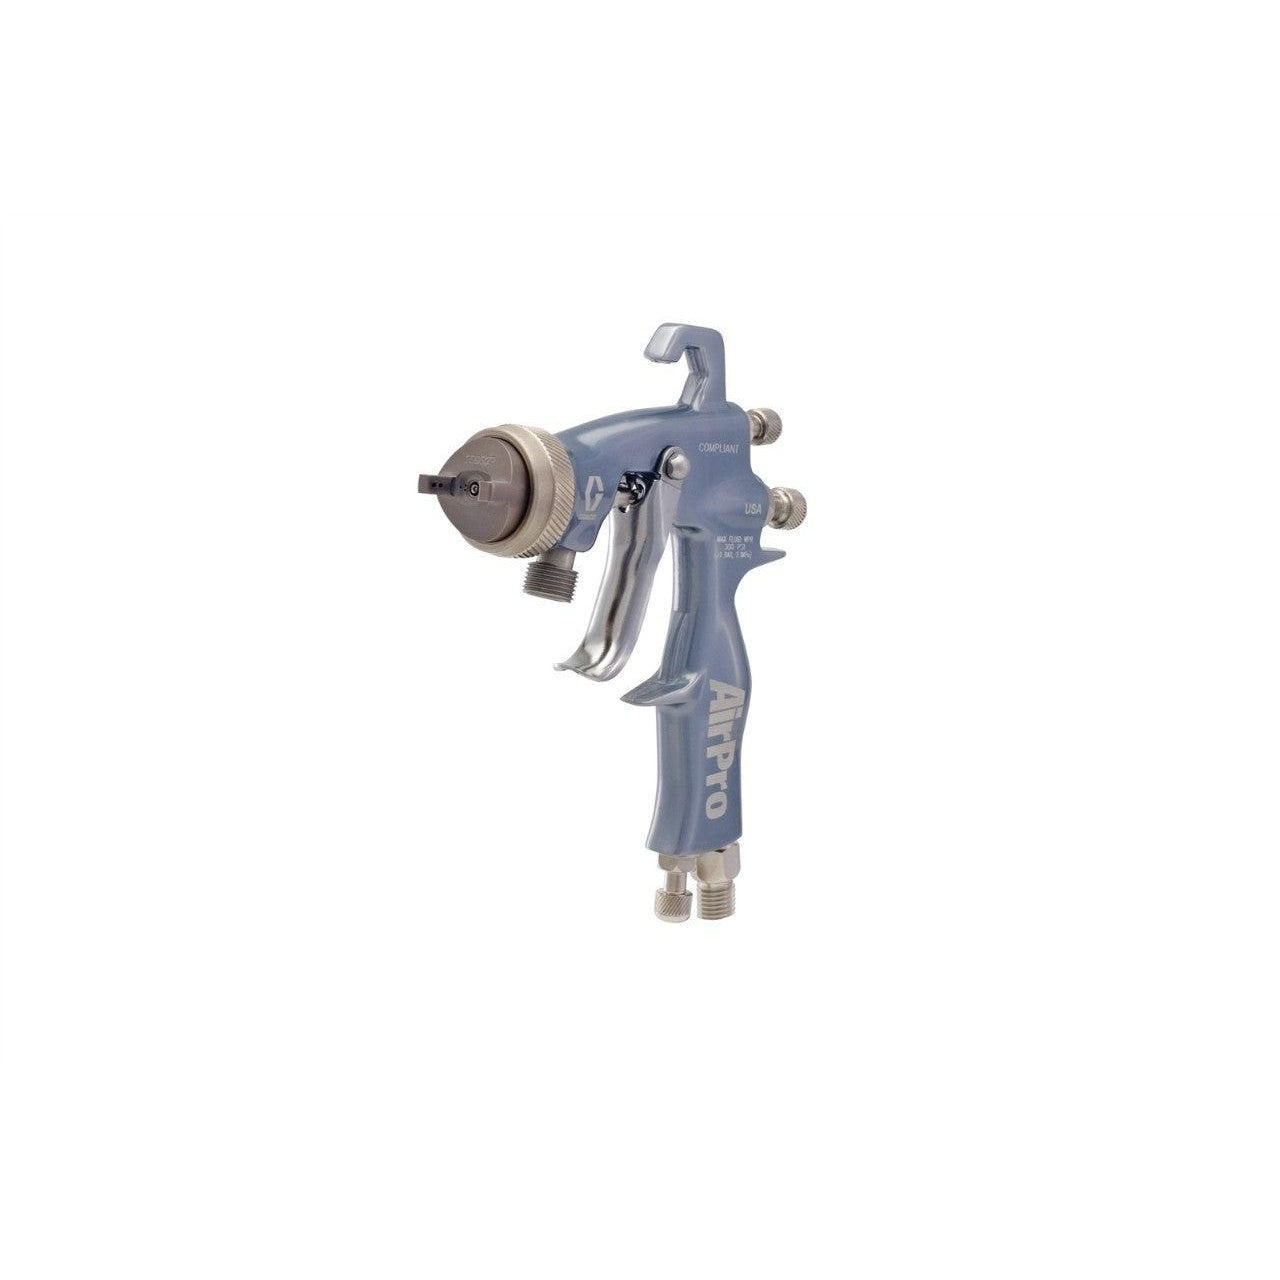 AirPro Air Spray Pressure Feed Gun, Compliant, 0.070 inch (1.8 mm) Nozzle, for General Metal Applications